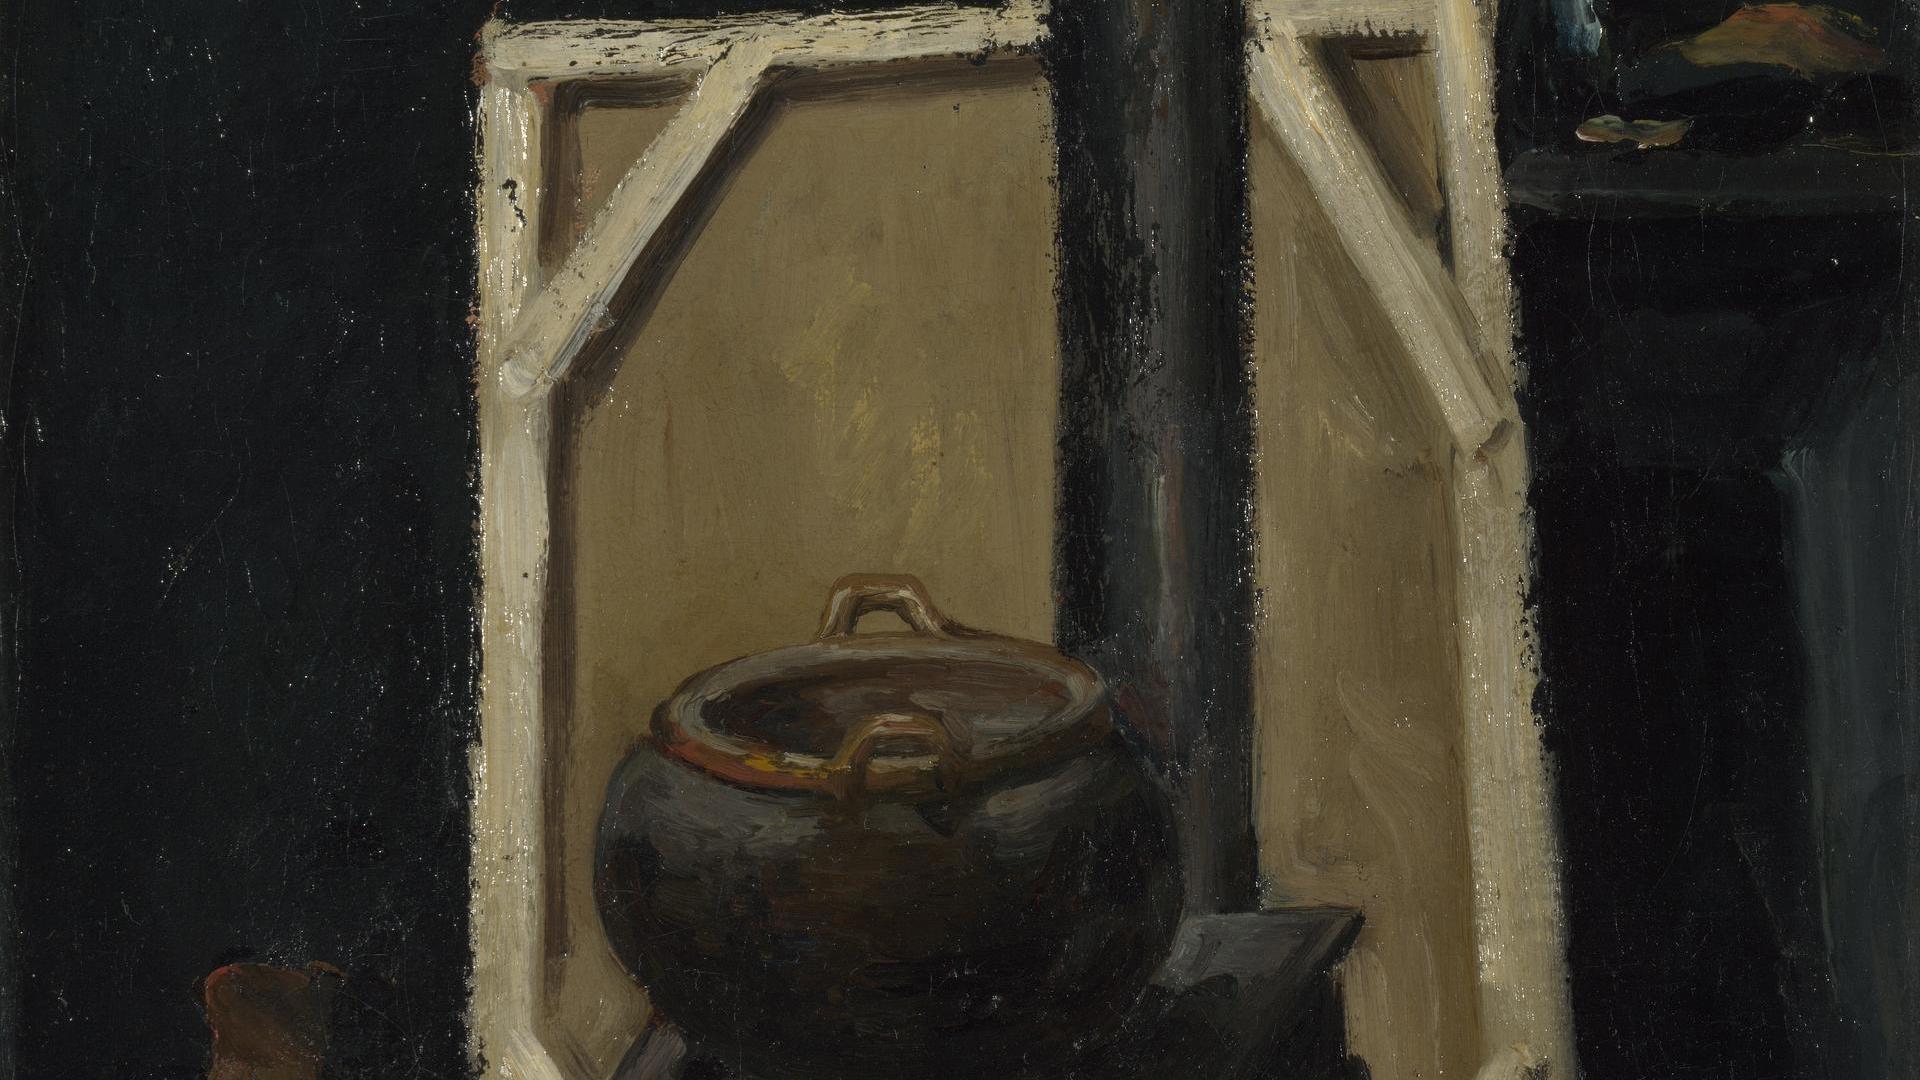 The Stove in the Studio by Paul Cézanne